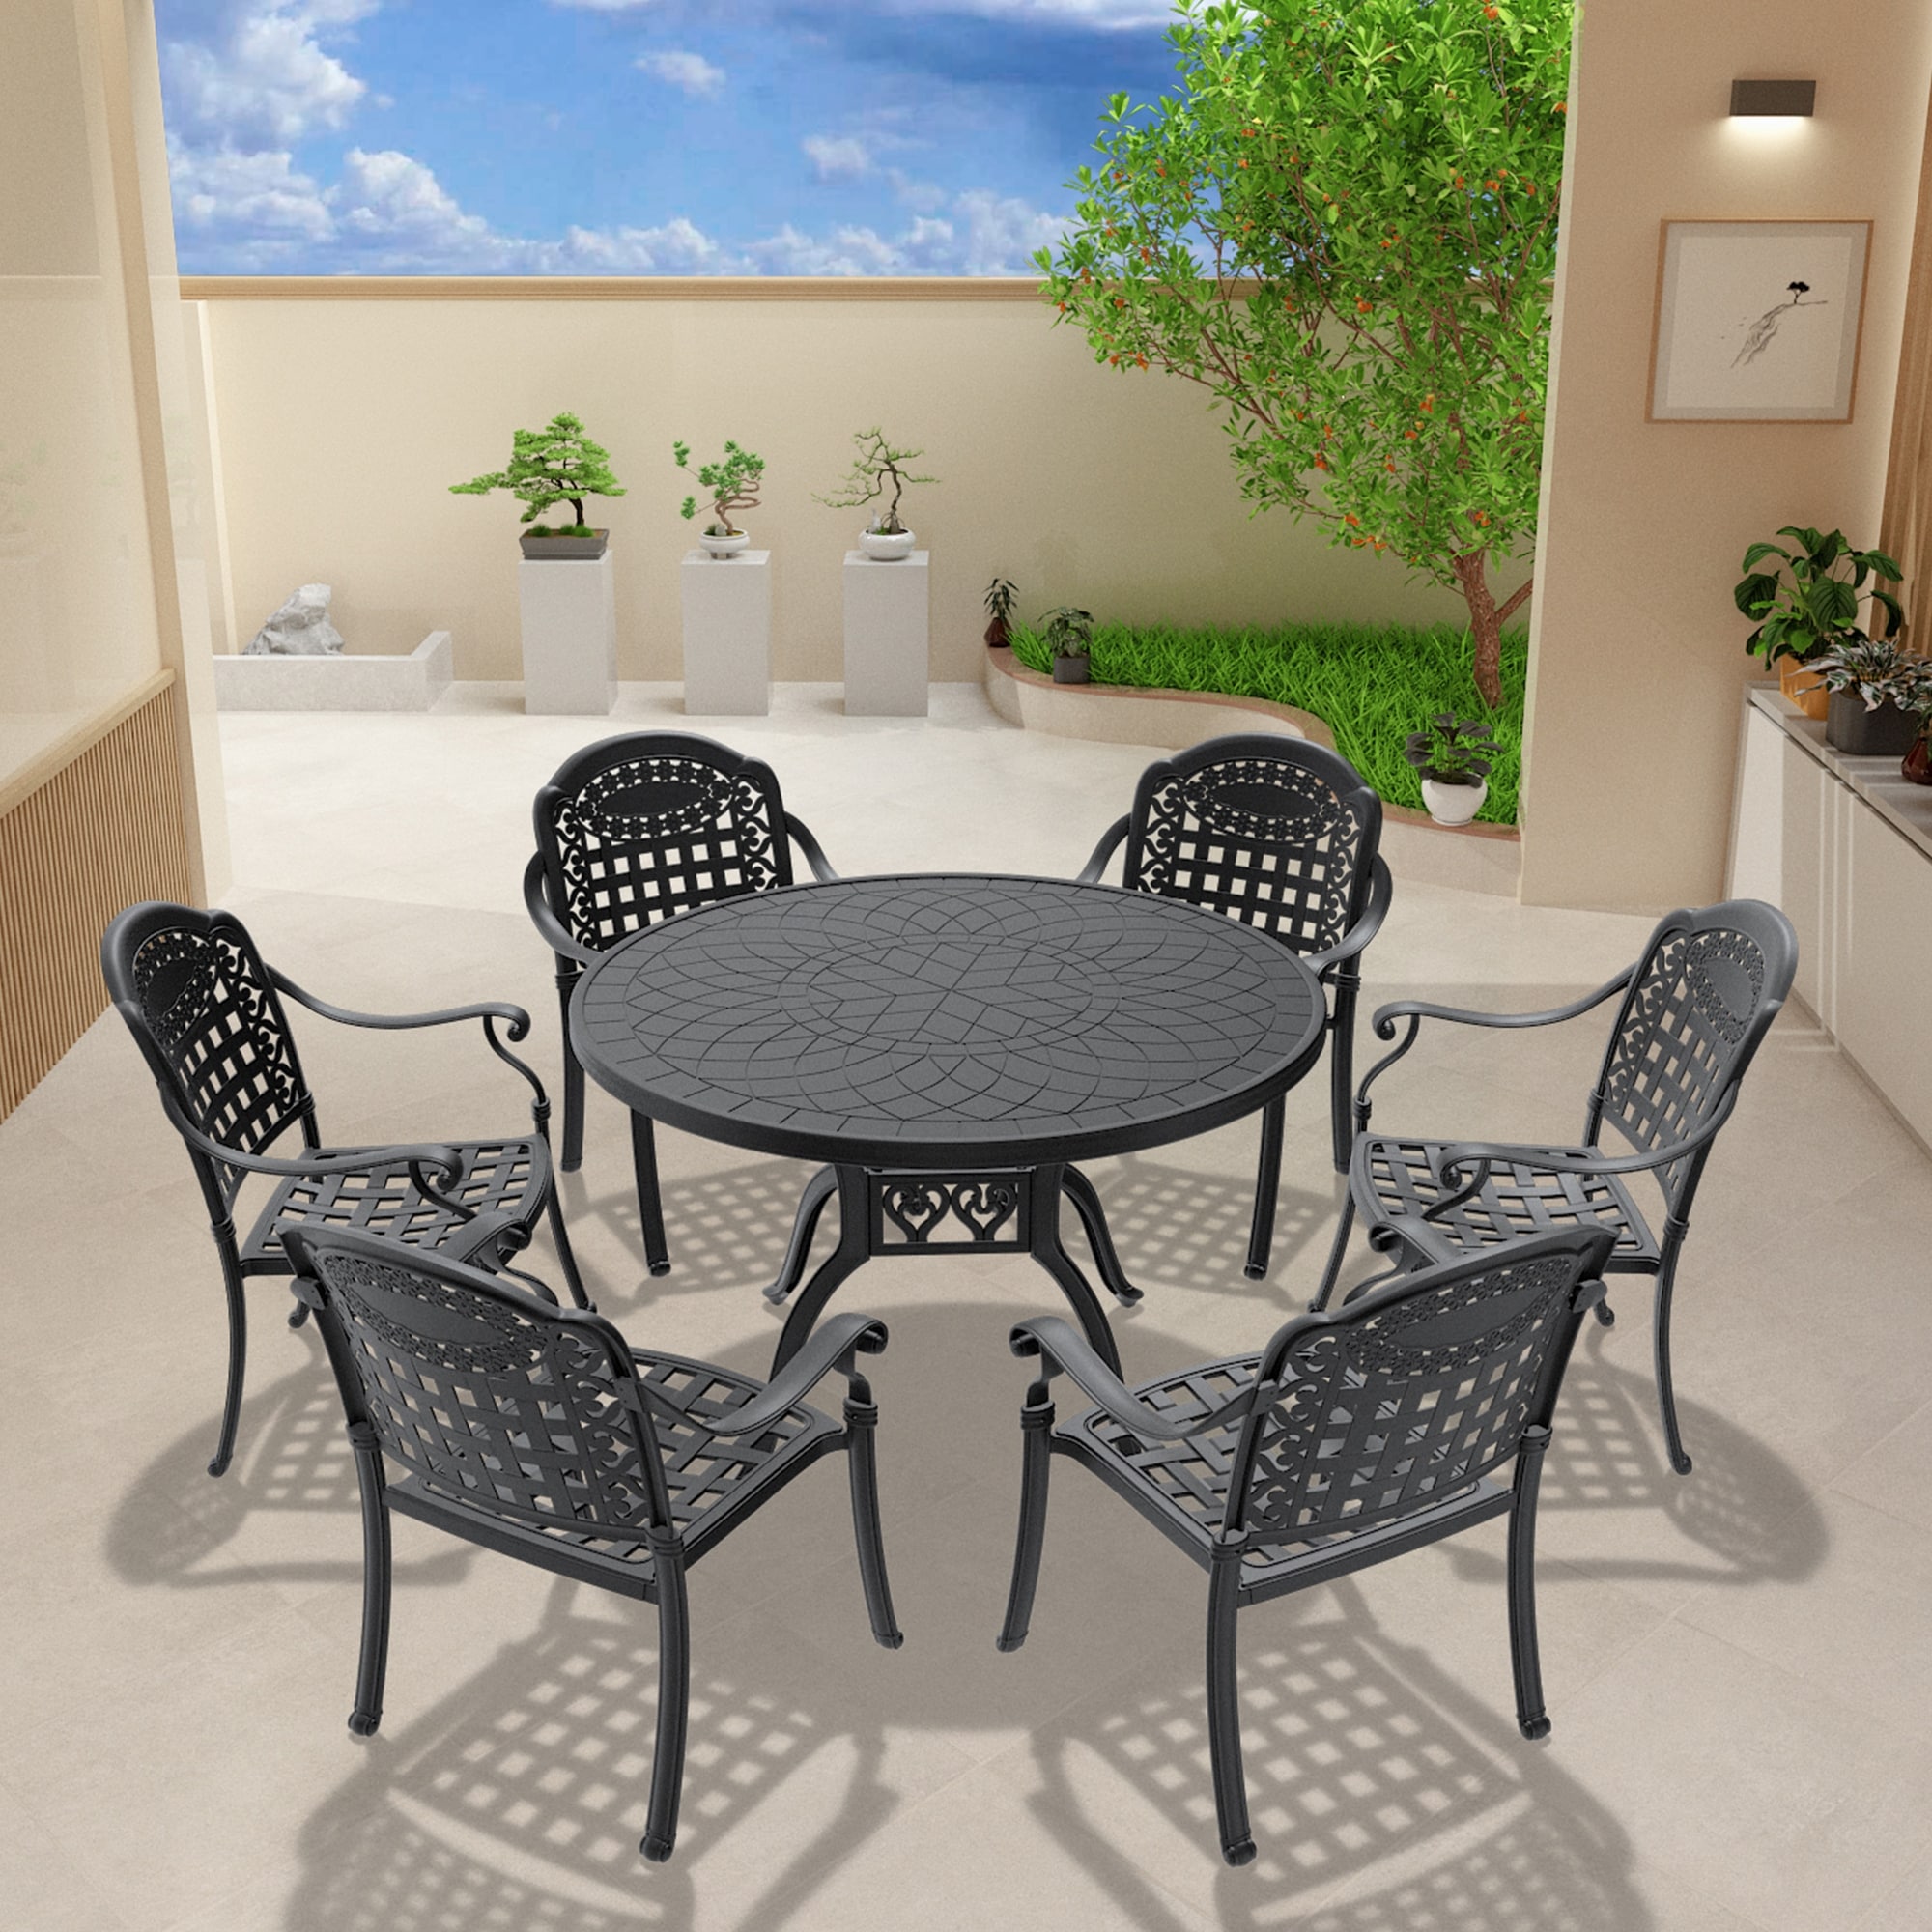 Floral Patterns Carved Patio Furniture Set  Aluminum Construction Outdoor Dining Set With 7 Cushion Chairs  For Porch  Backyard